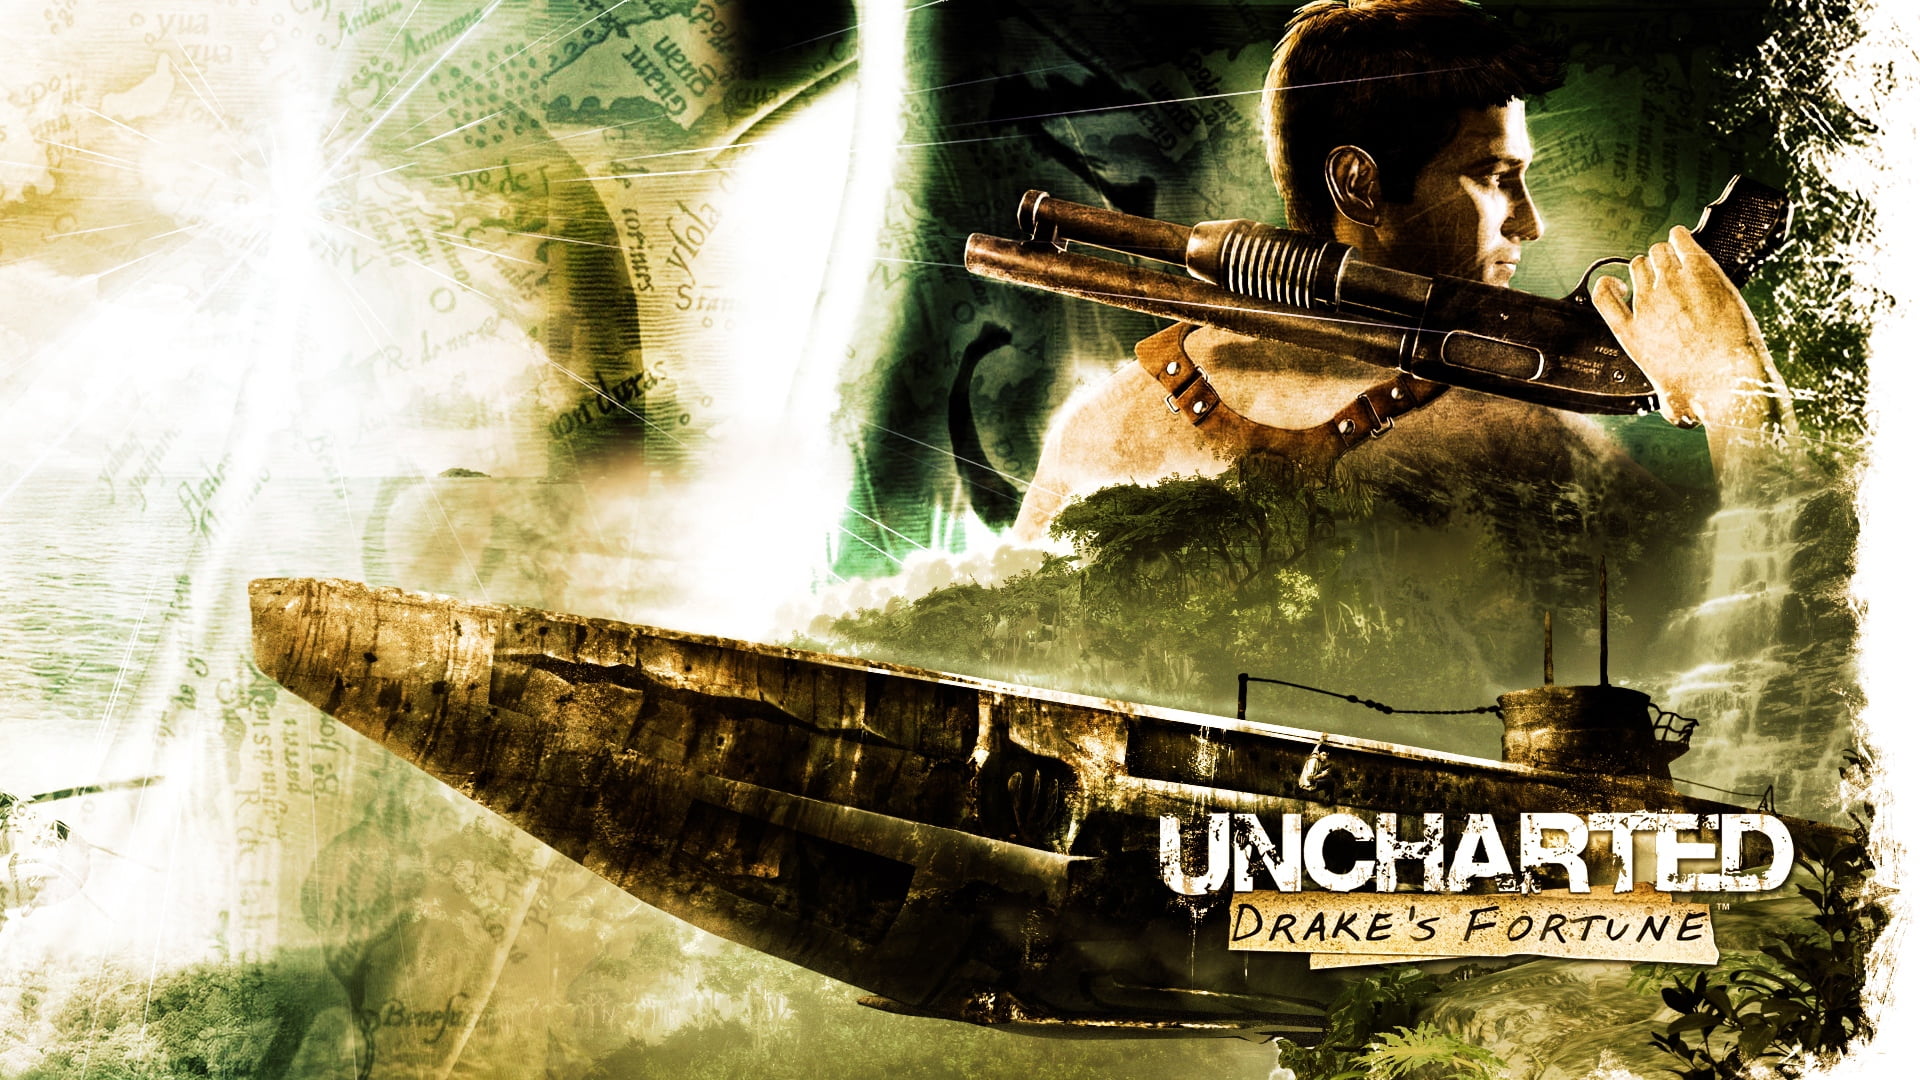 Uncharted Drake's Fortune wallpaper, uncharted drakes fortune